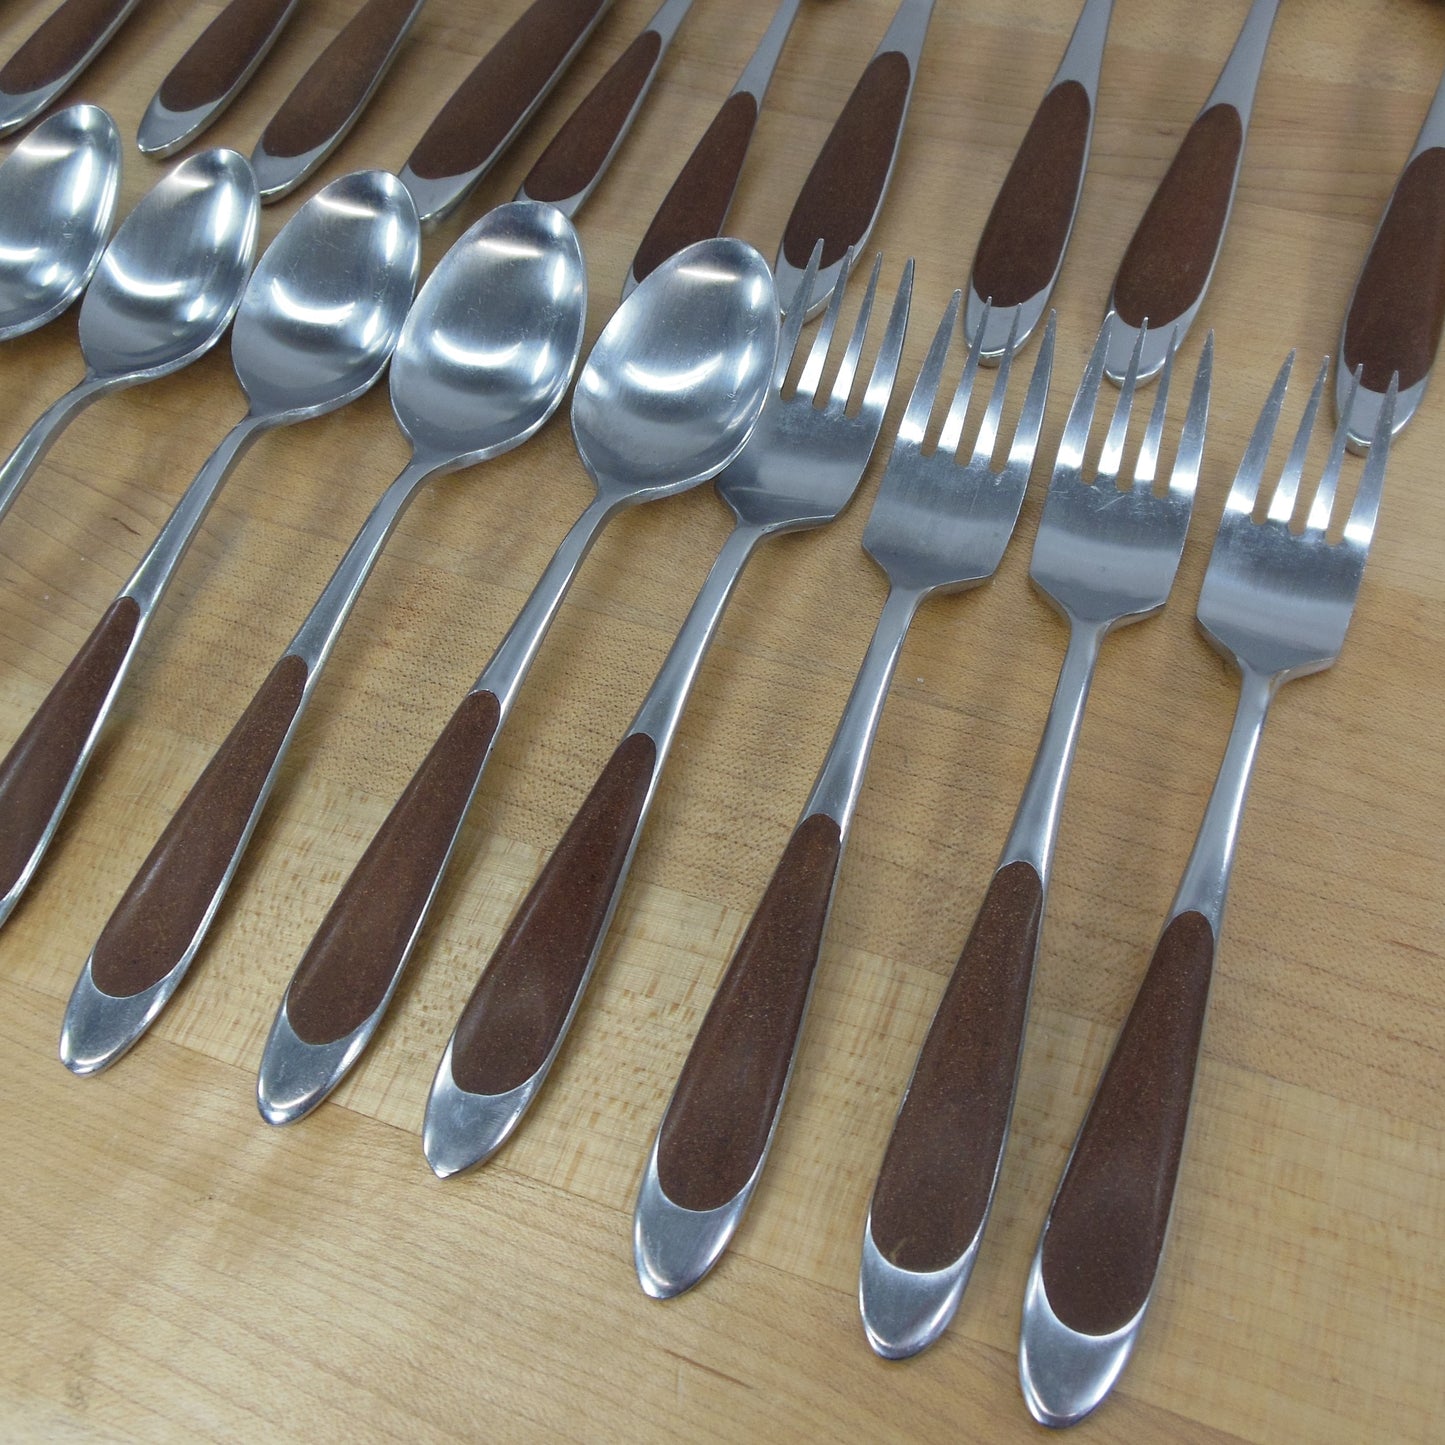 Unknown Maker Japan Stainless Flatware Brown Canoe Composite Handles 22 Pieces Vintage